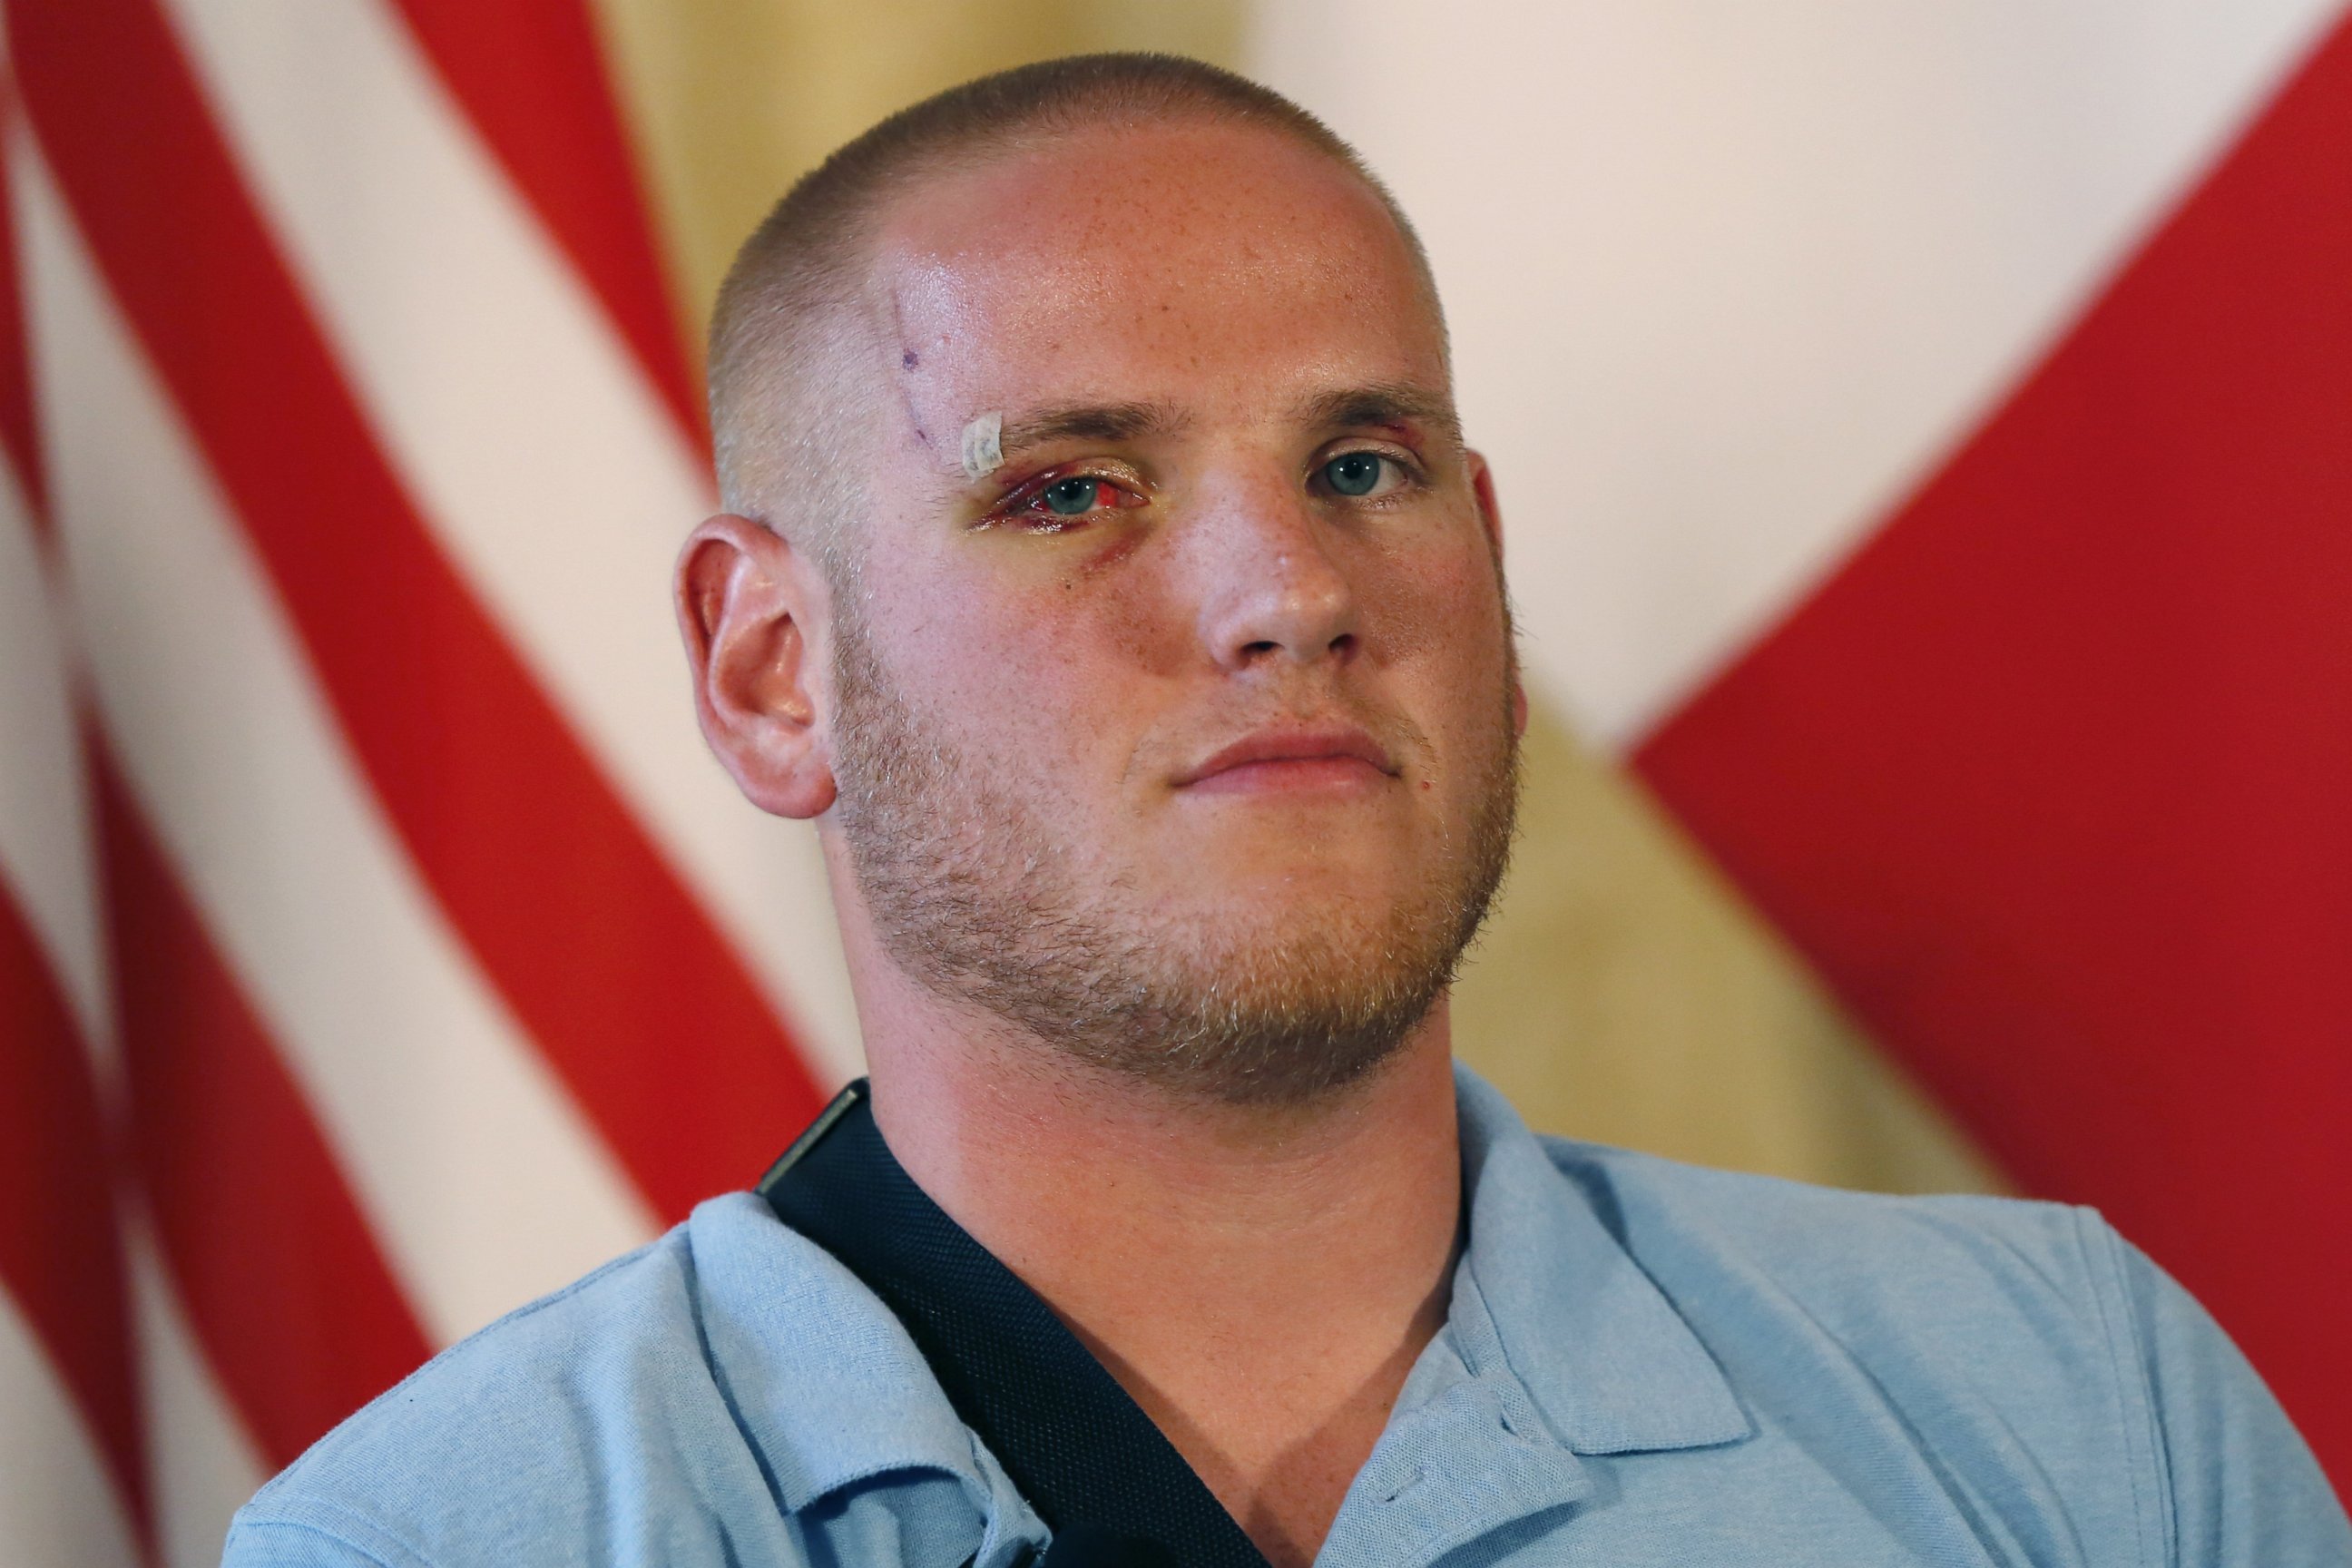 PHOTO: Off-duty U.S. serviceman Spencer Stone poses after a press conference at the U.S. embassy in Paris on Aug. 23, 2015, two days after 25-year-old Moroccan Ayoub El-Khazzani opened fire on a Thalys train traveling from Amsterdam to Paris. 